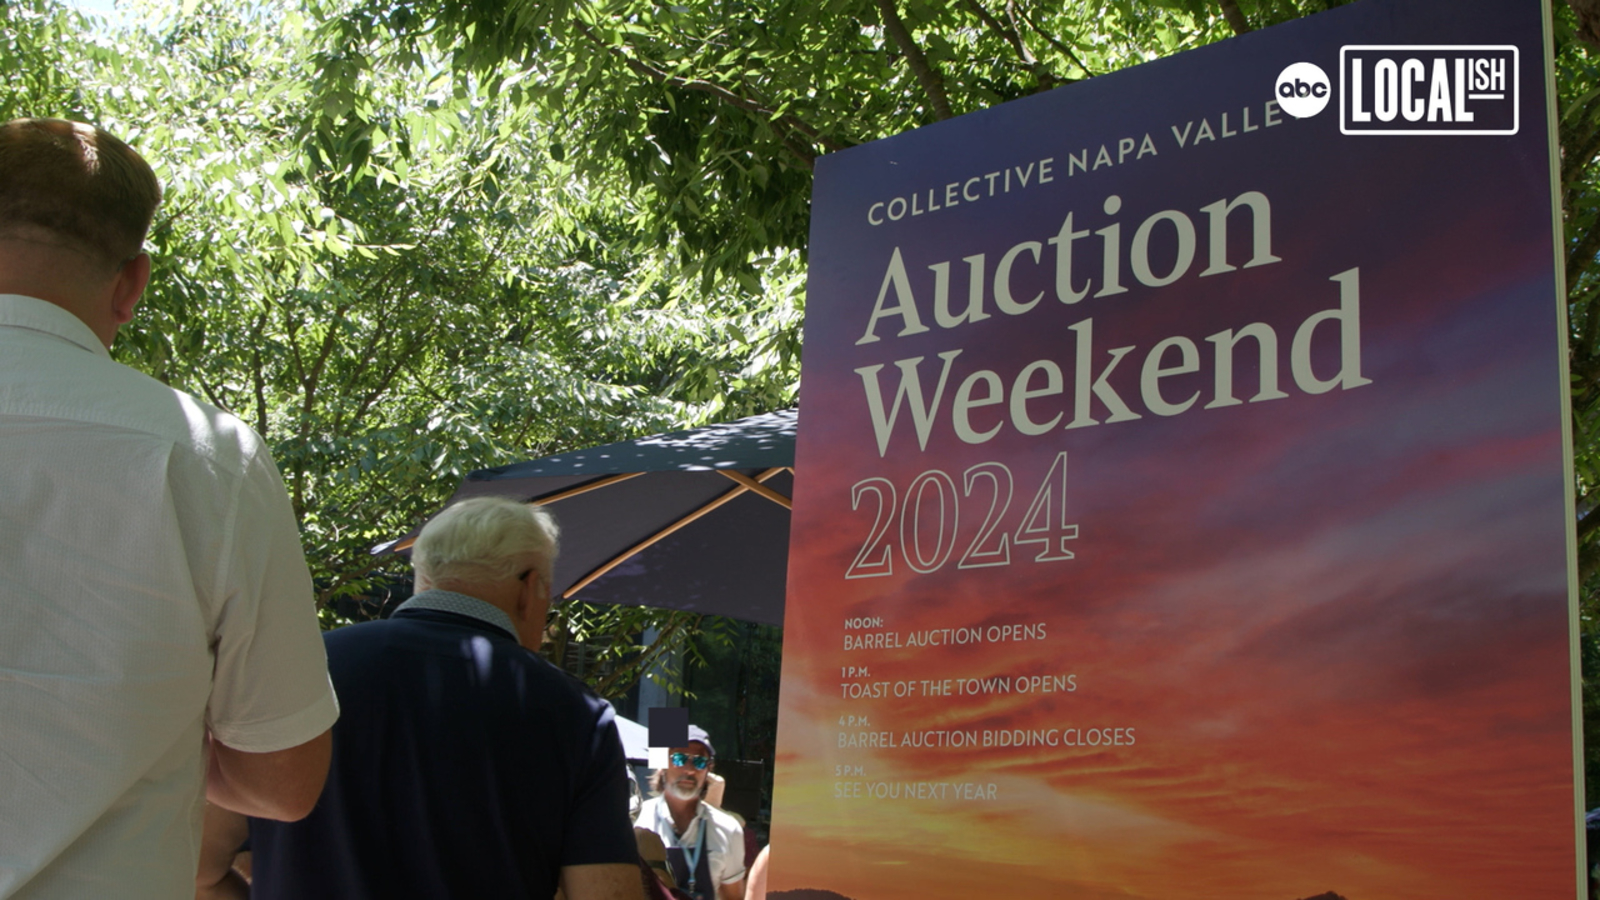 Collective Napa Valley Auction Weekend raises money for youth mental health [Video]